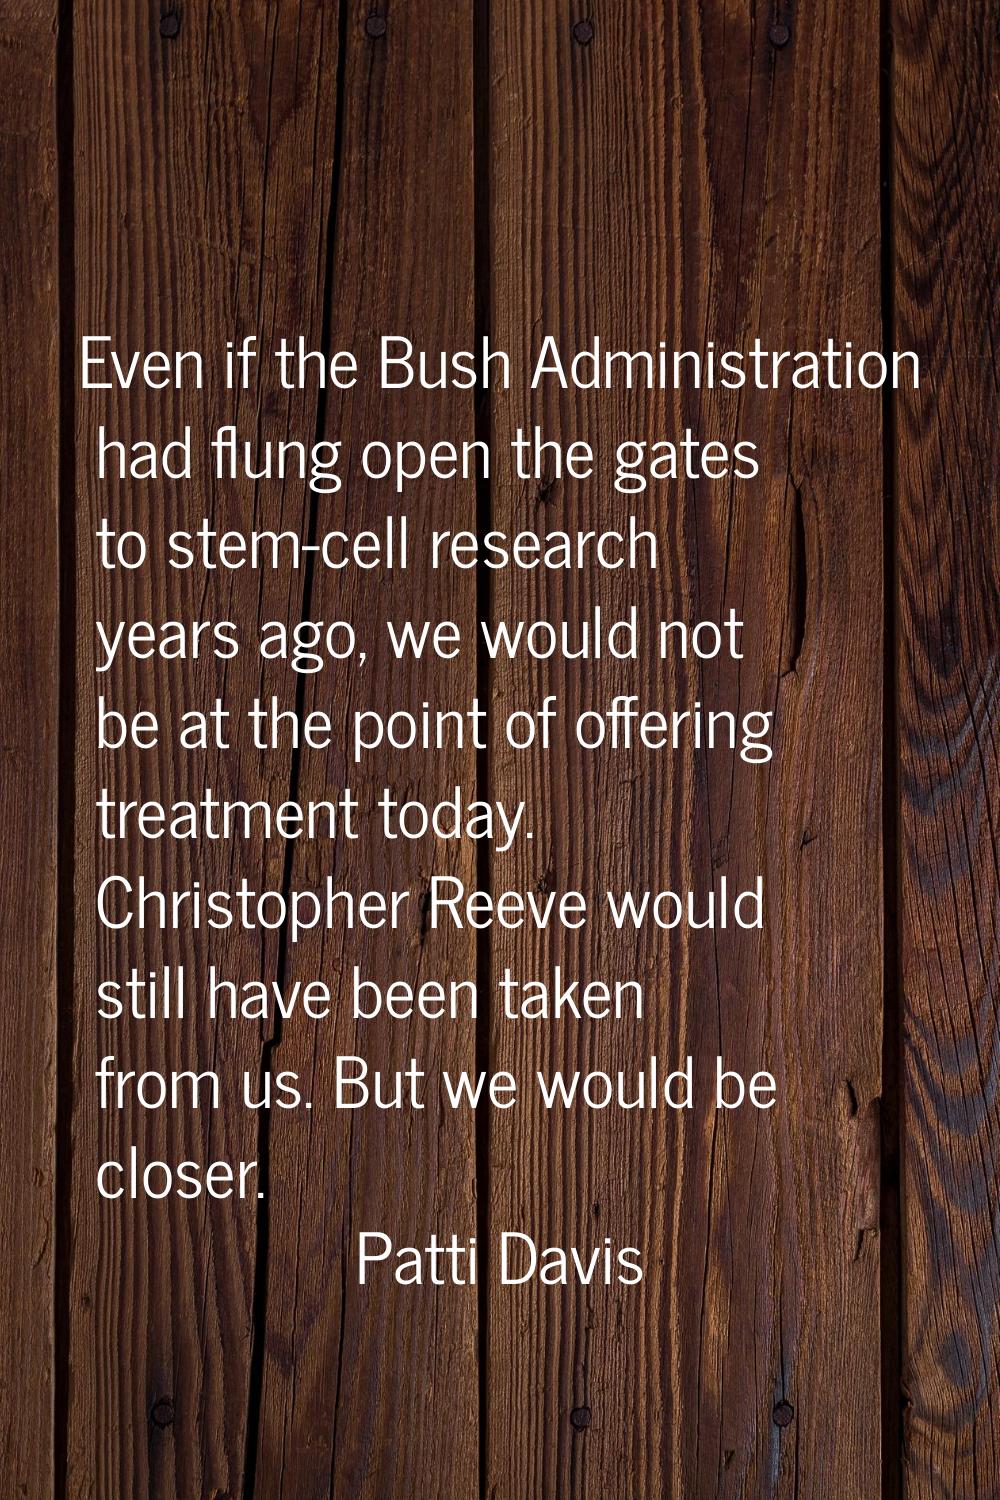 Even if the Bush Administration had flung open the gates to stem-cell research years ago, we would 